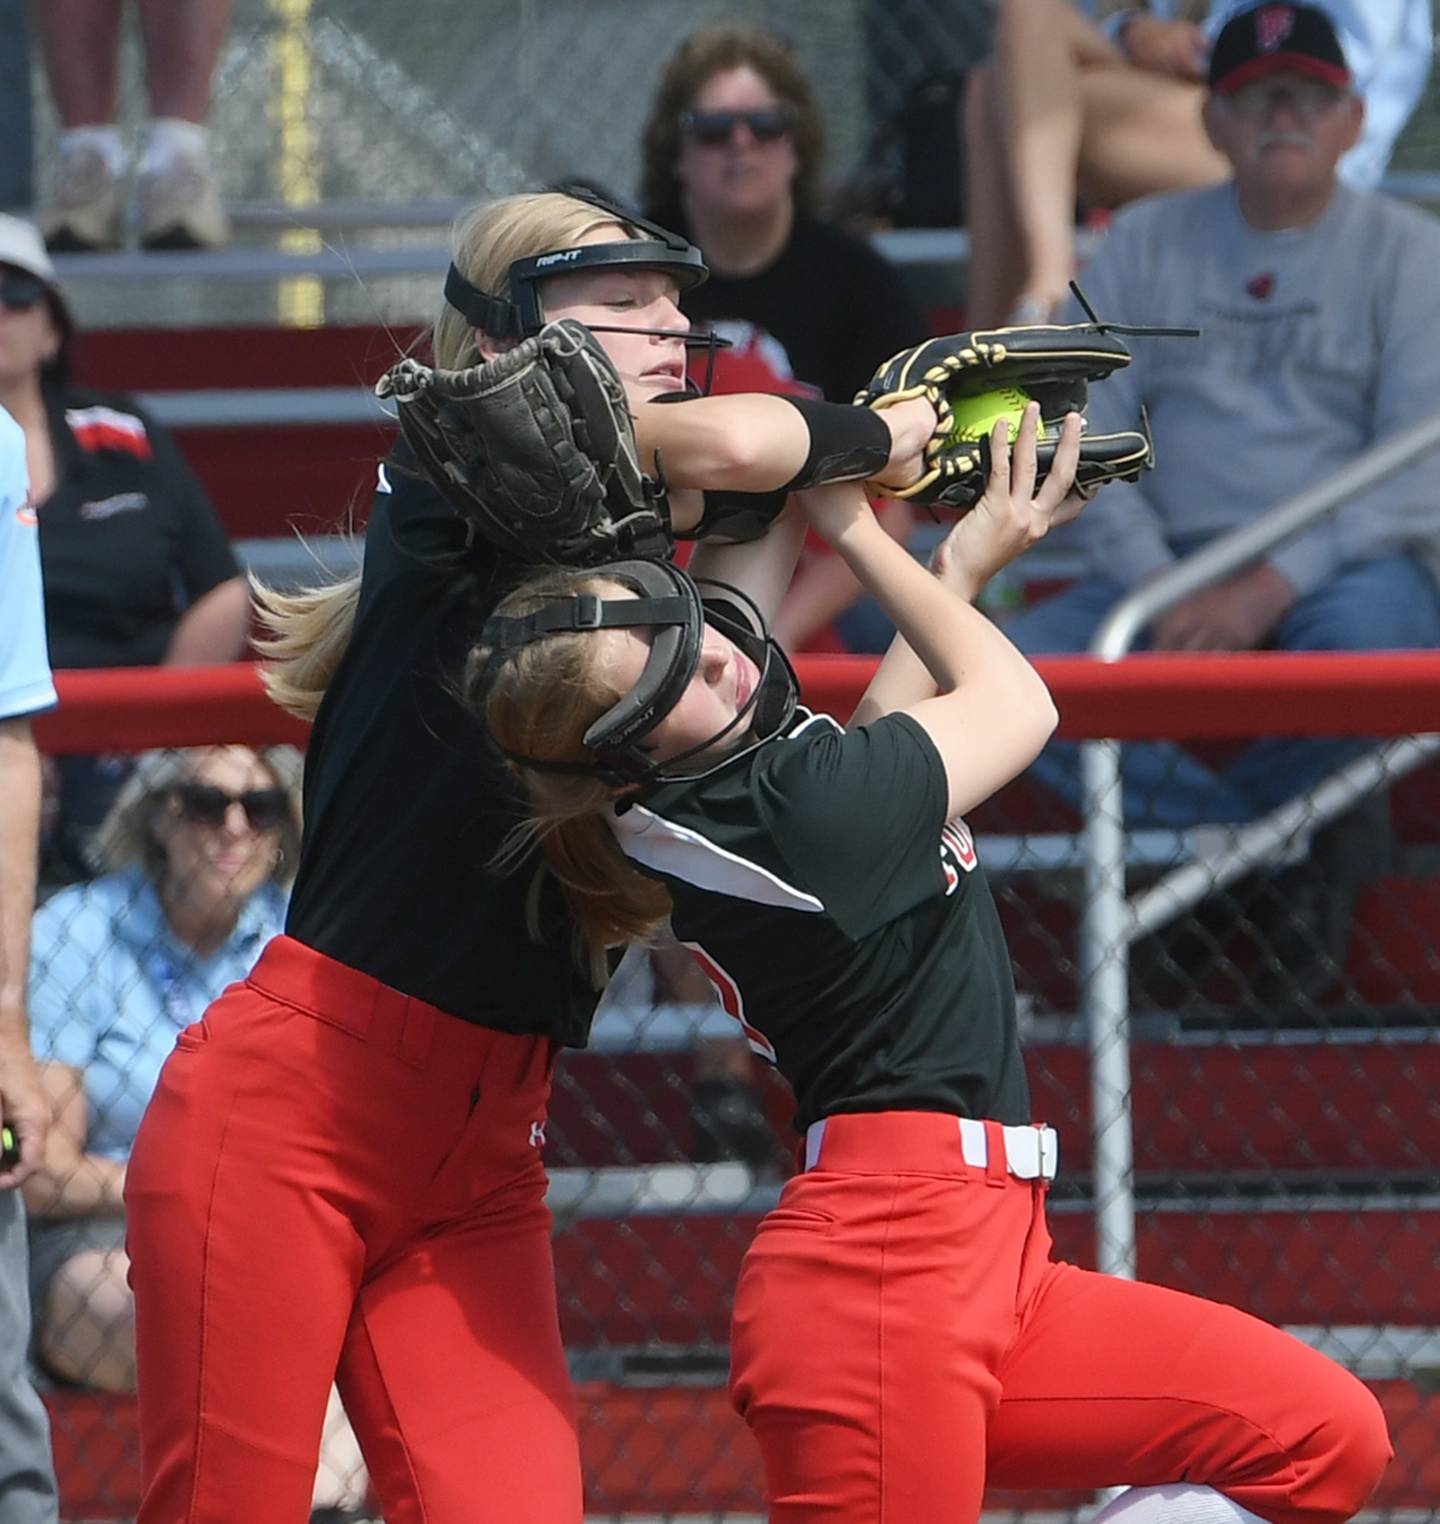 Forreston firstbaseman Ella Ingram and second baseman Alaina Miller go for a fly ball during the game for third place at the 1A state softball finals in Peoria on Saturday. The Cardinals beat Newark 4-2 in 8 innings.